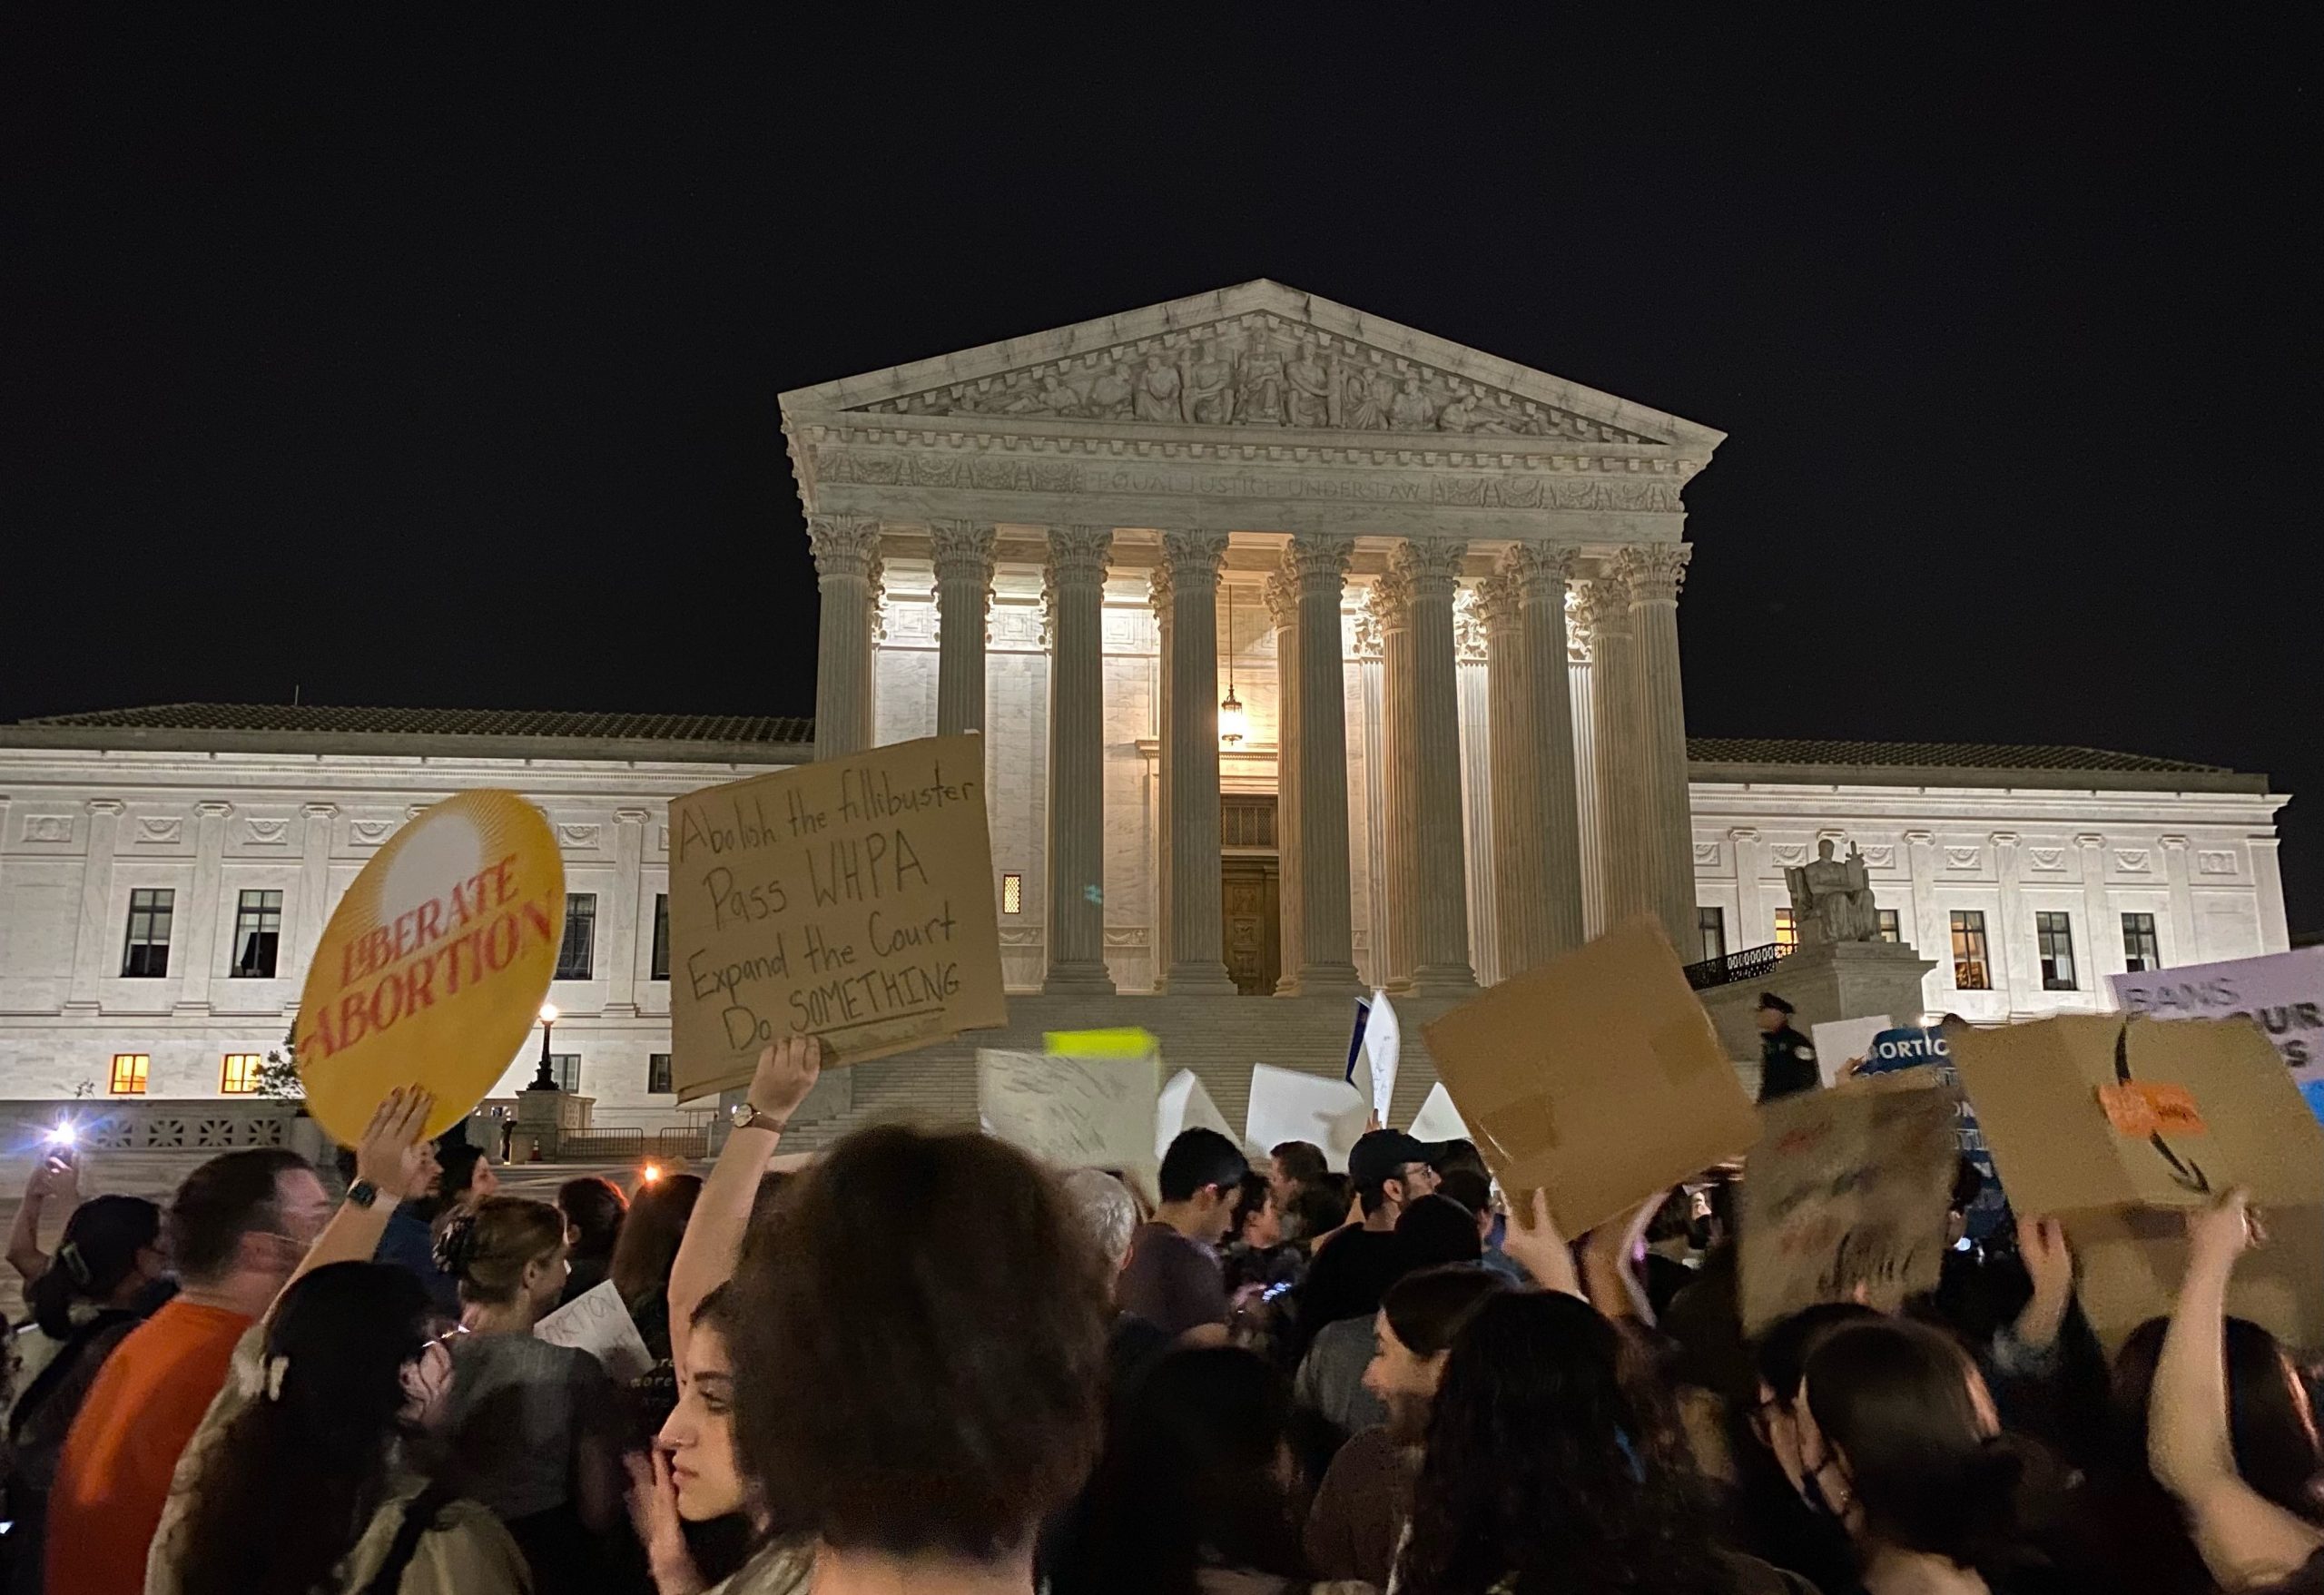 nighttime scene in front of supreme court with crowd of people holding signs supporting abortion rights